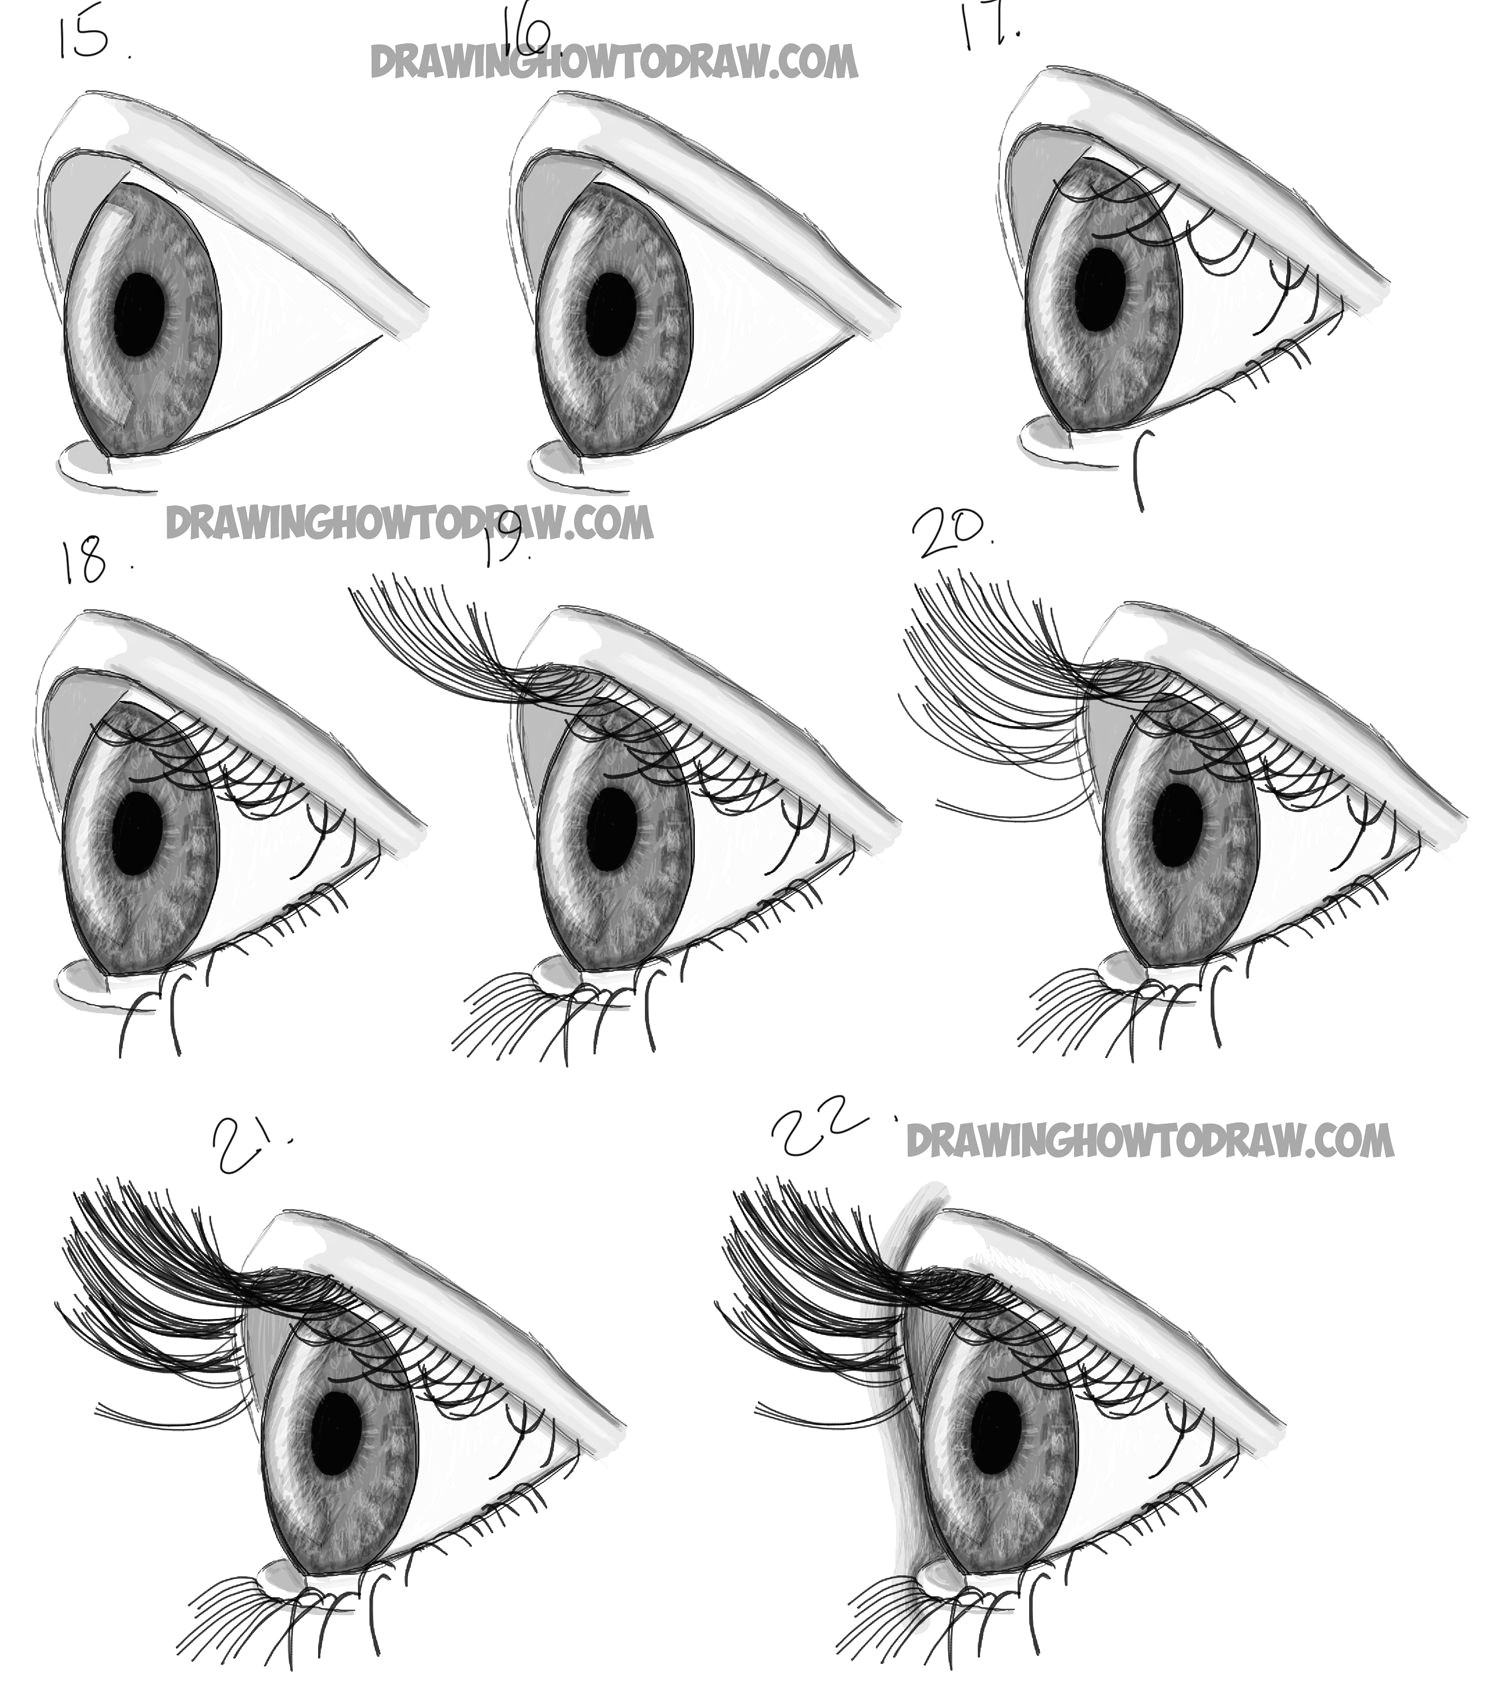 Drawing Eye Side View How to Draw Realistic Eyes From the Side Profile View Step by Step